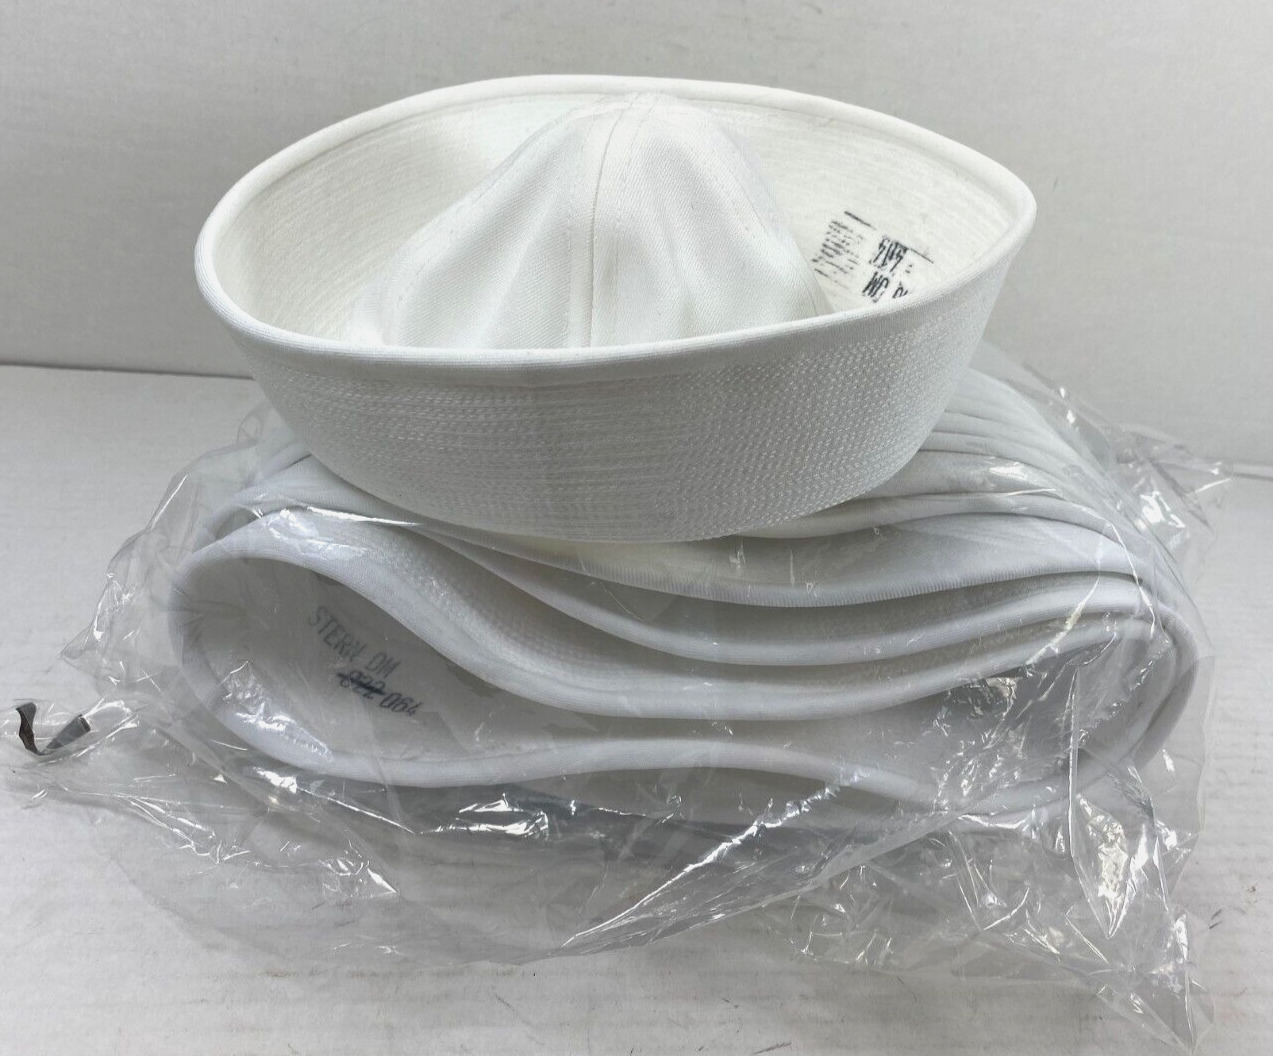 US issue Navy Dixie Cup (Enlist/Stamp) Sailor Hat, White size Medium (7 1/4)